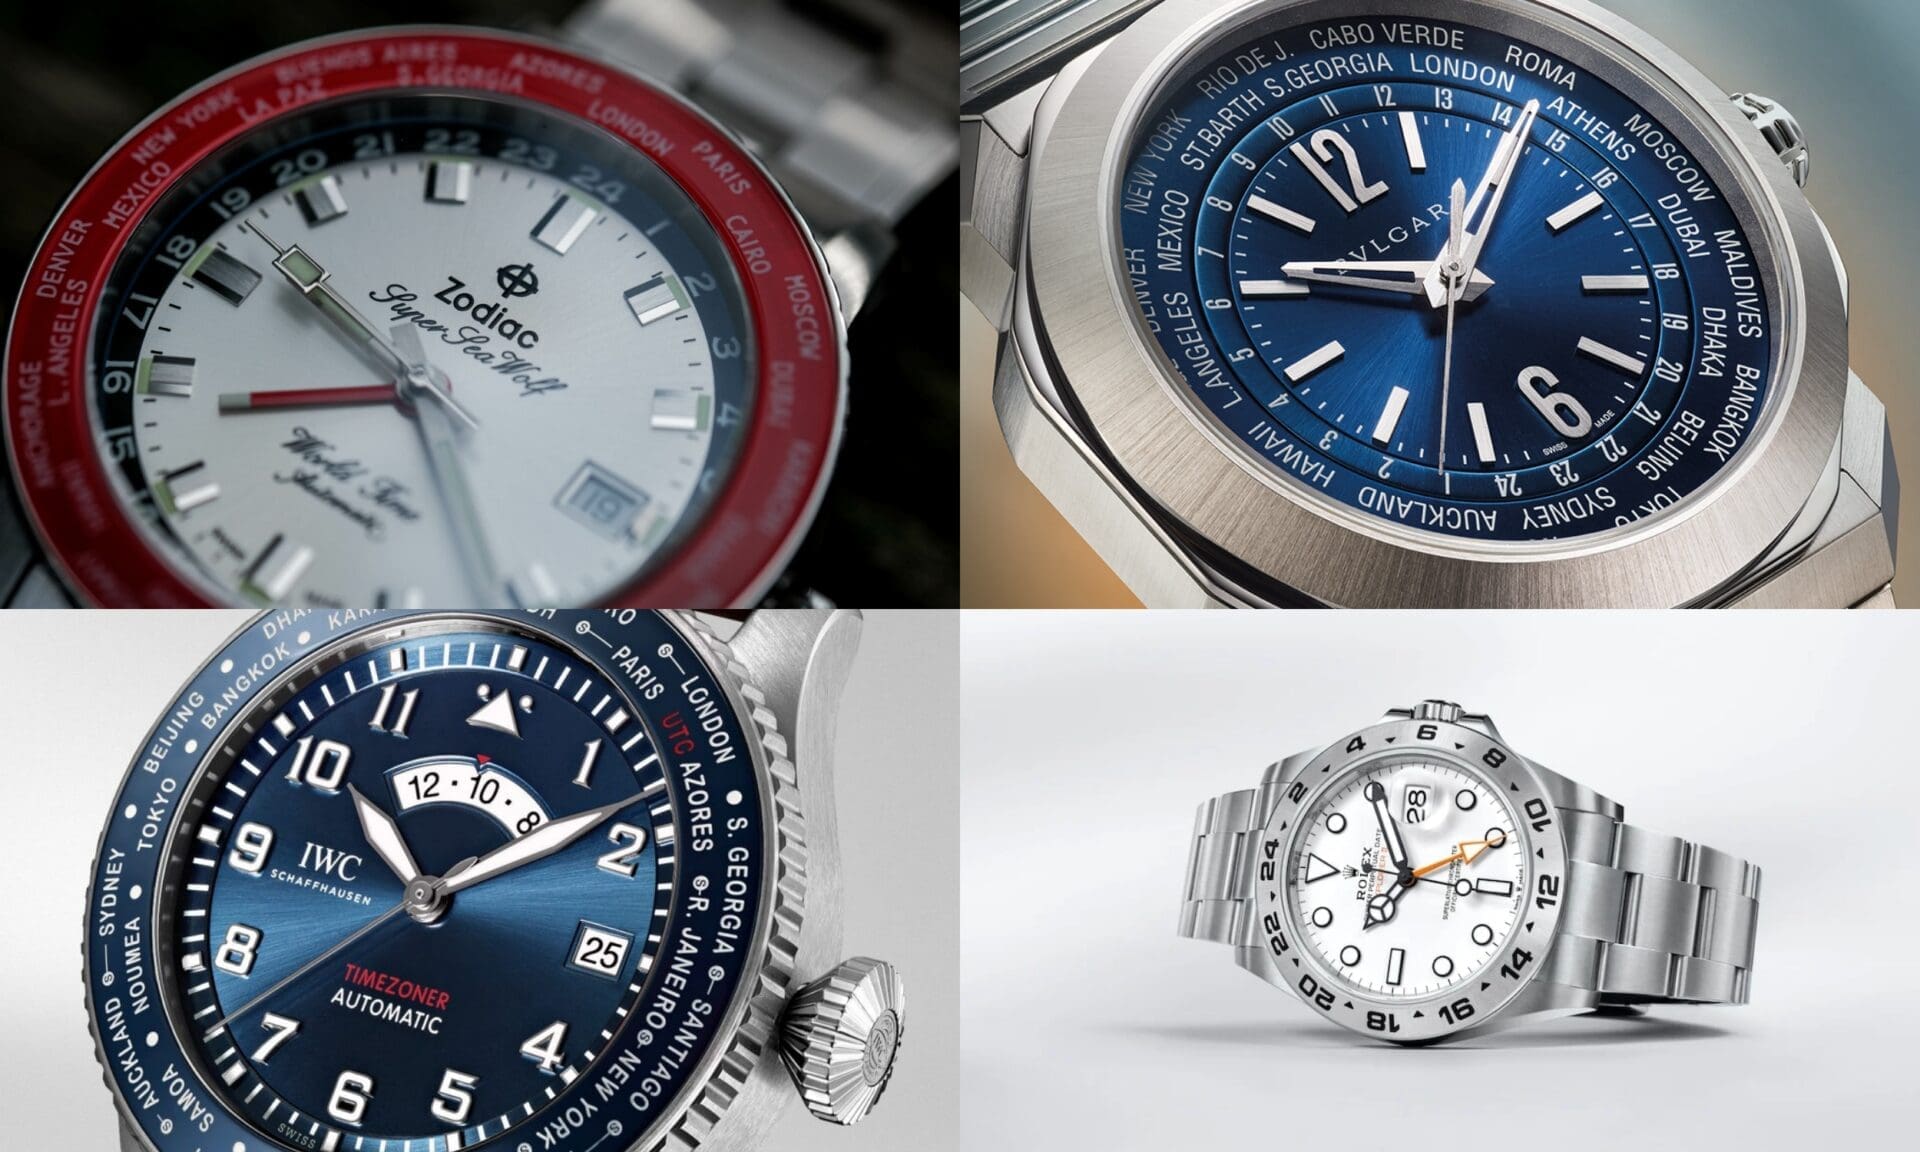 Time flies: The best travel watches from the last 12 months